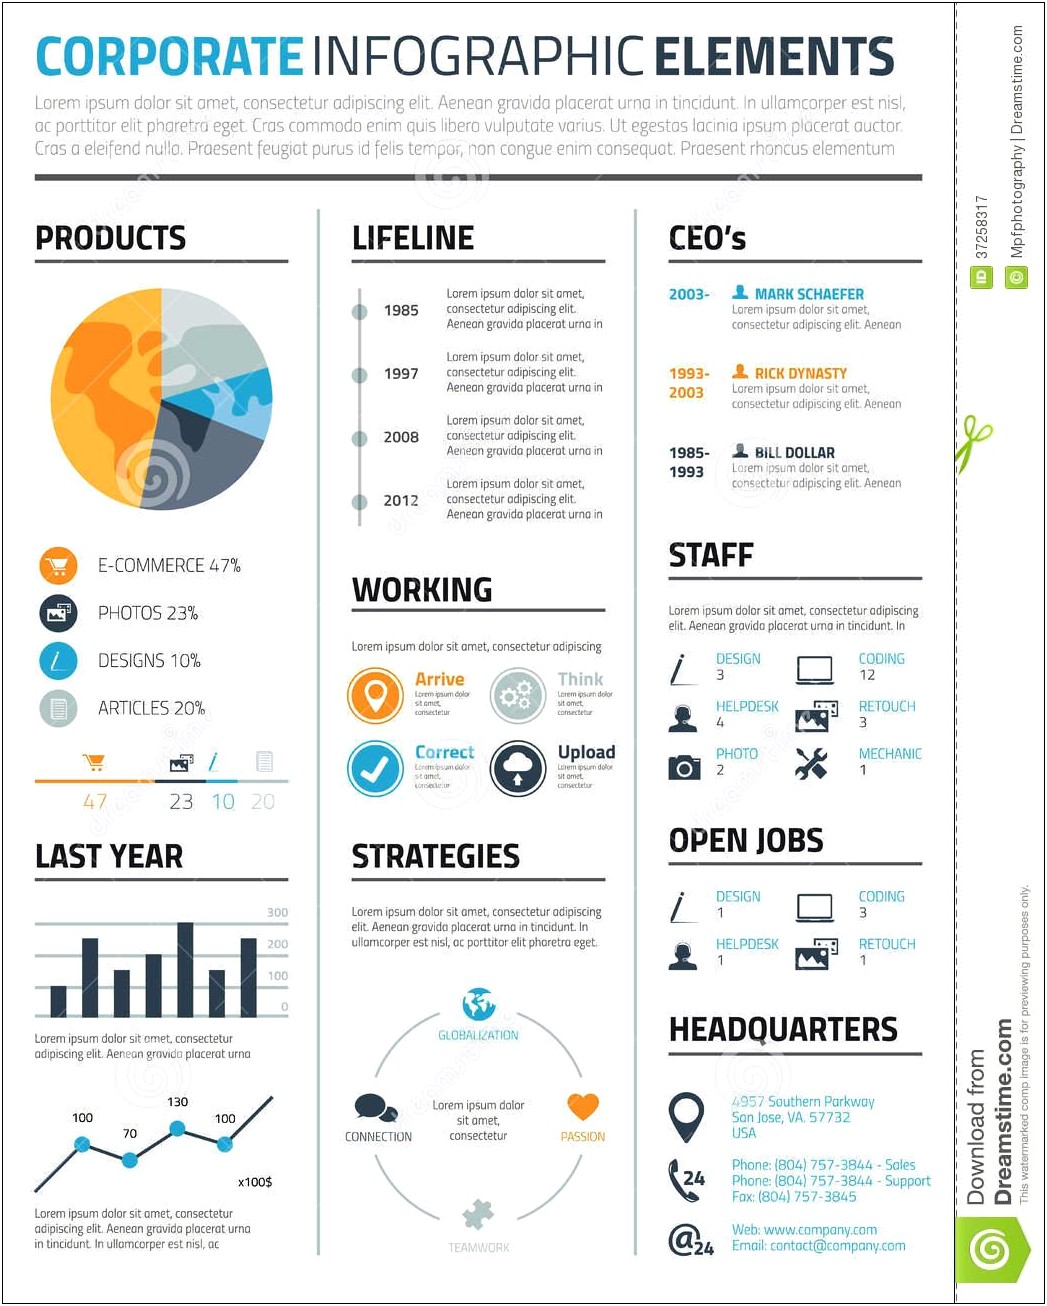 Template Resume Cv Infographic Free Download